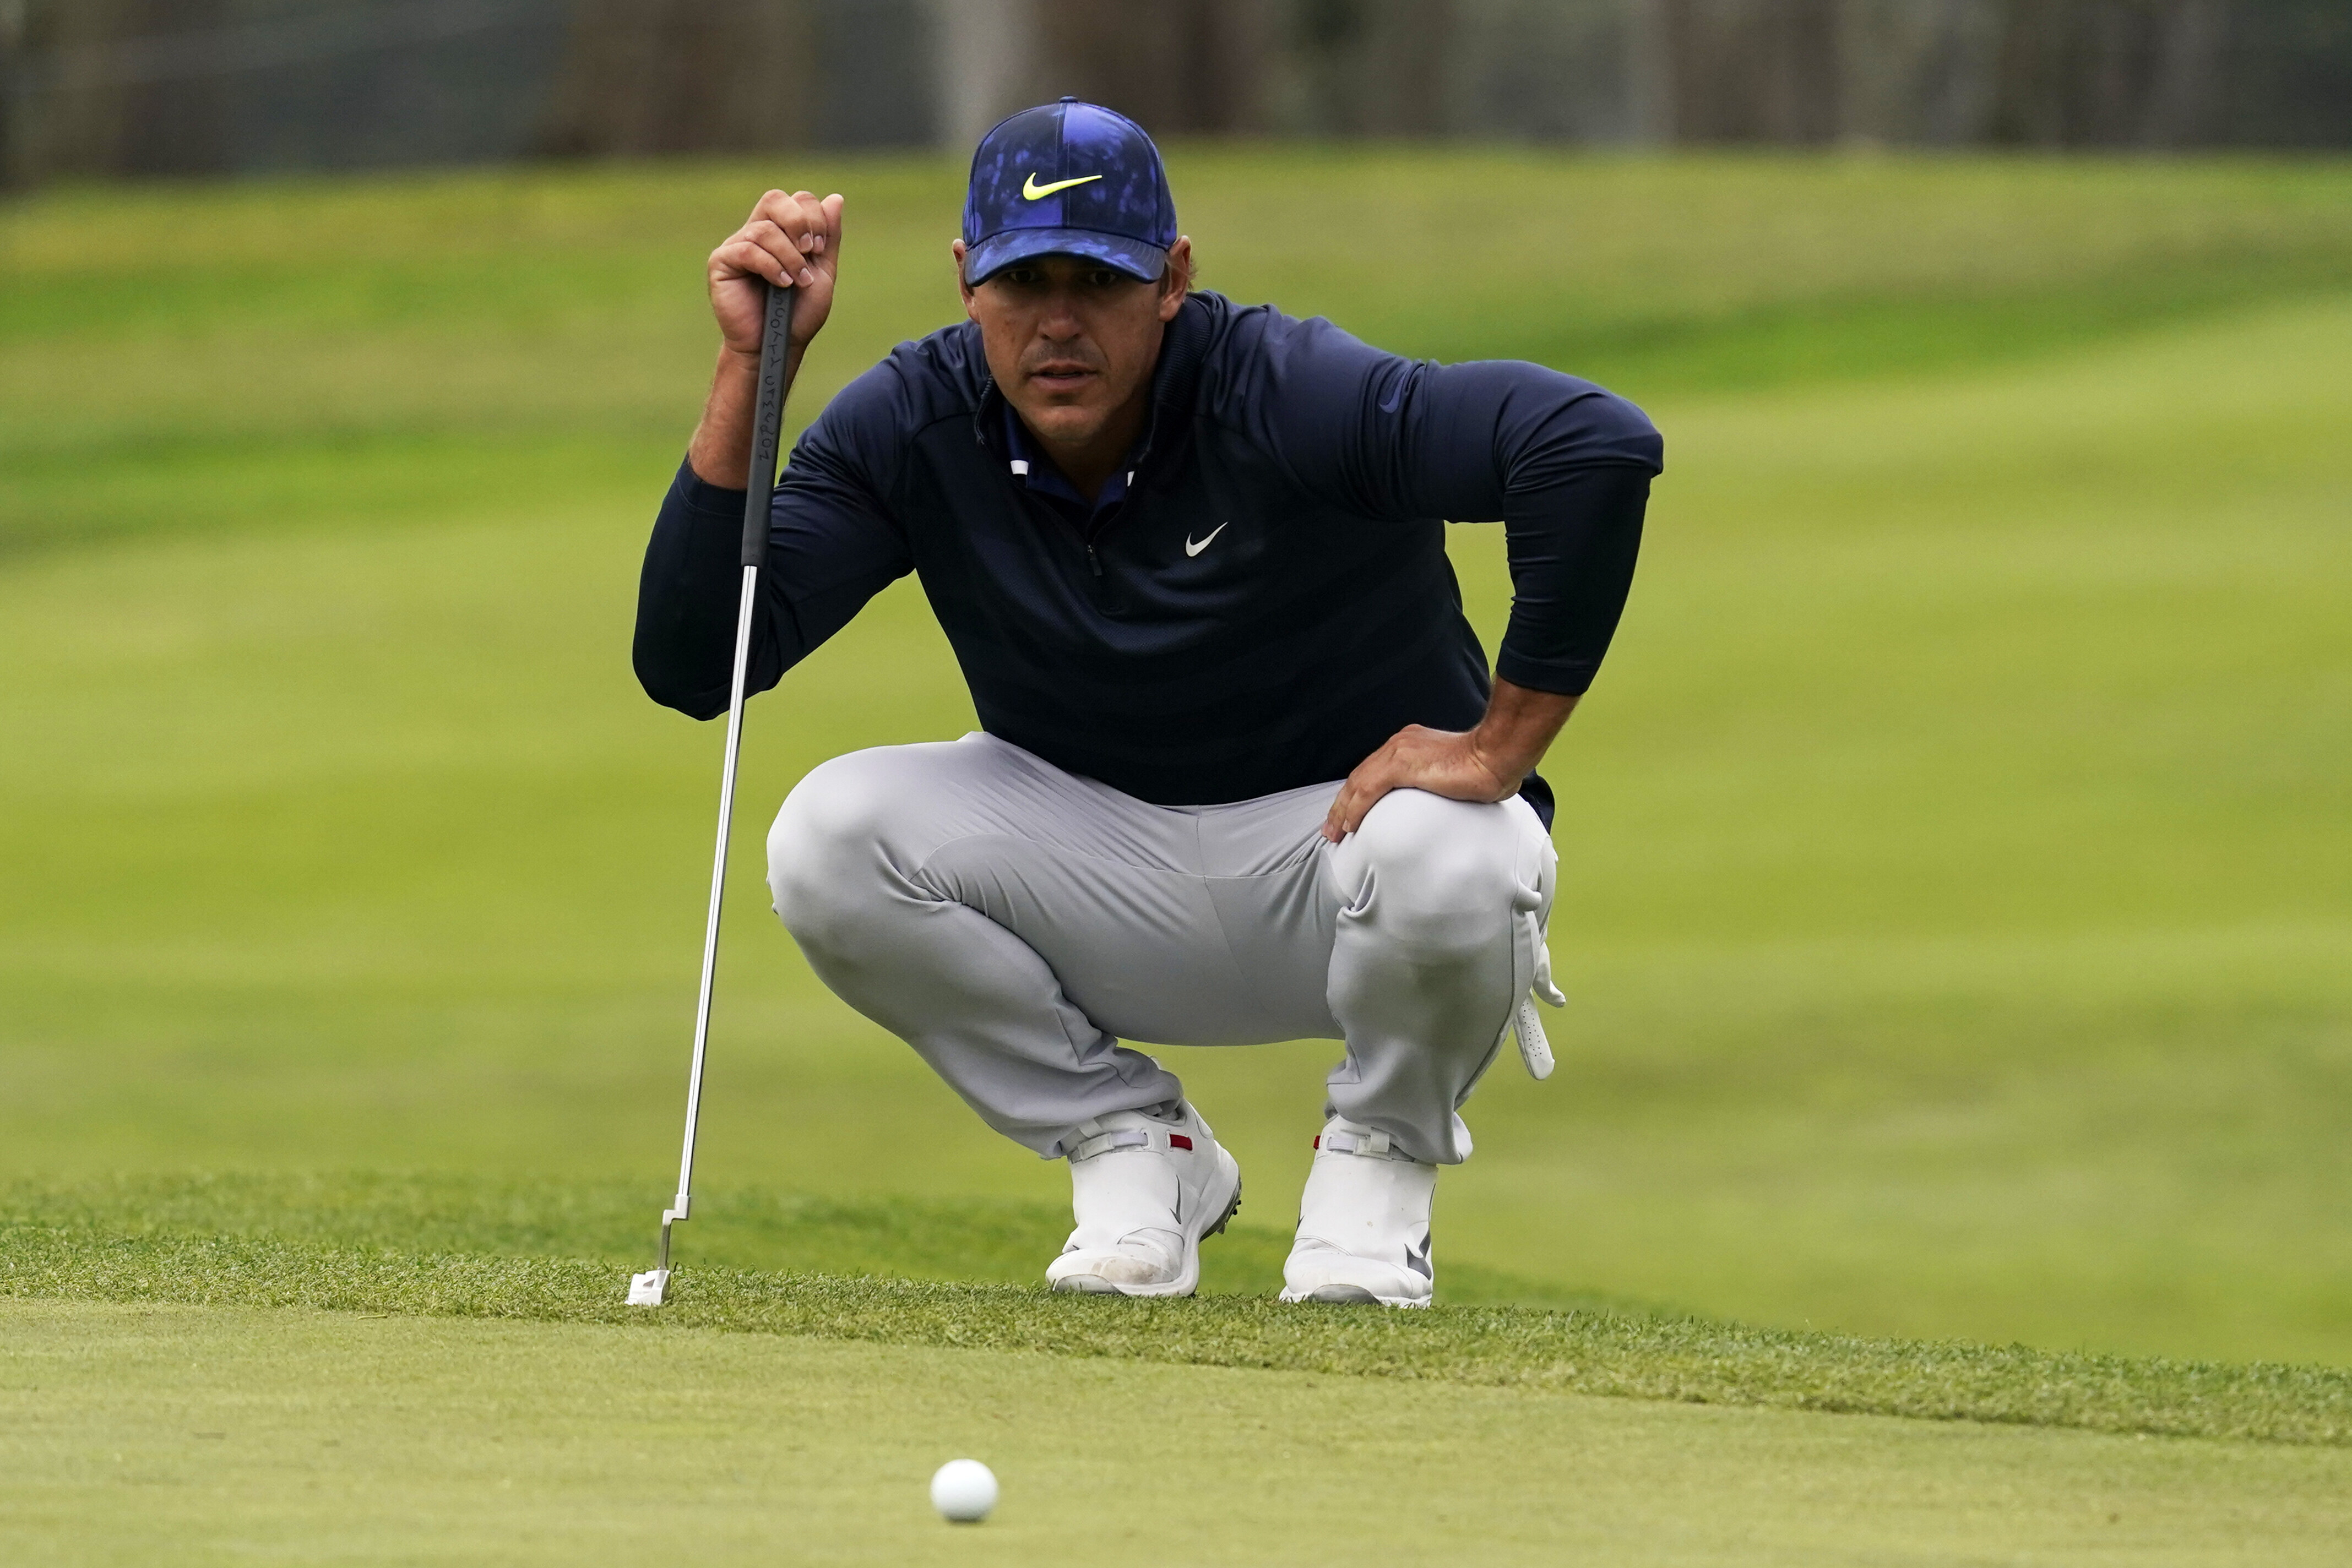 PGA Championship 2020 Day 4 FREE LIVE STREAM (8/9/20) Watch Tiger Woods, Brooks Koepka online Time, TV, channel